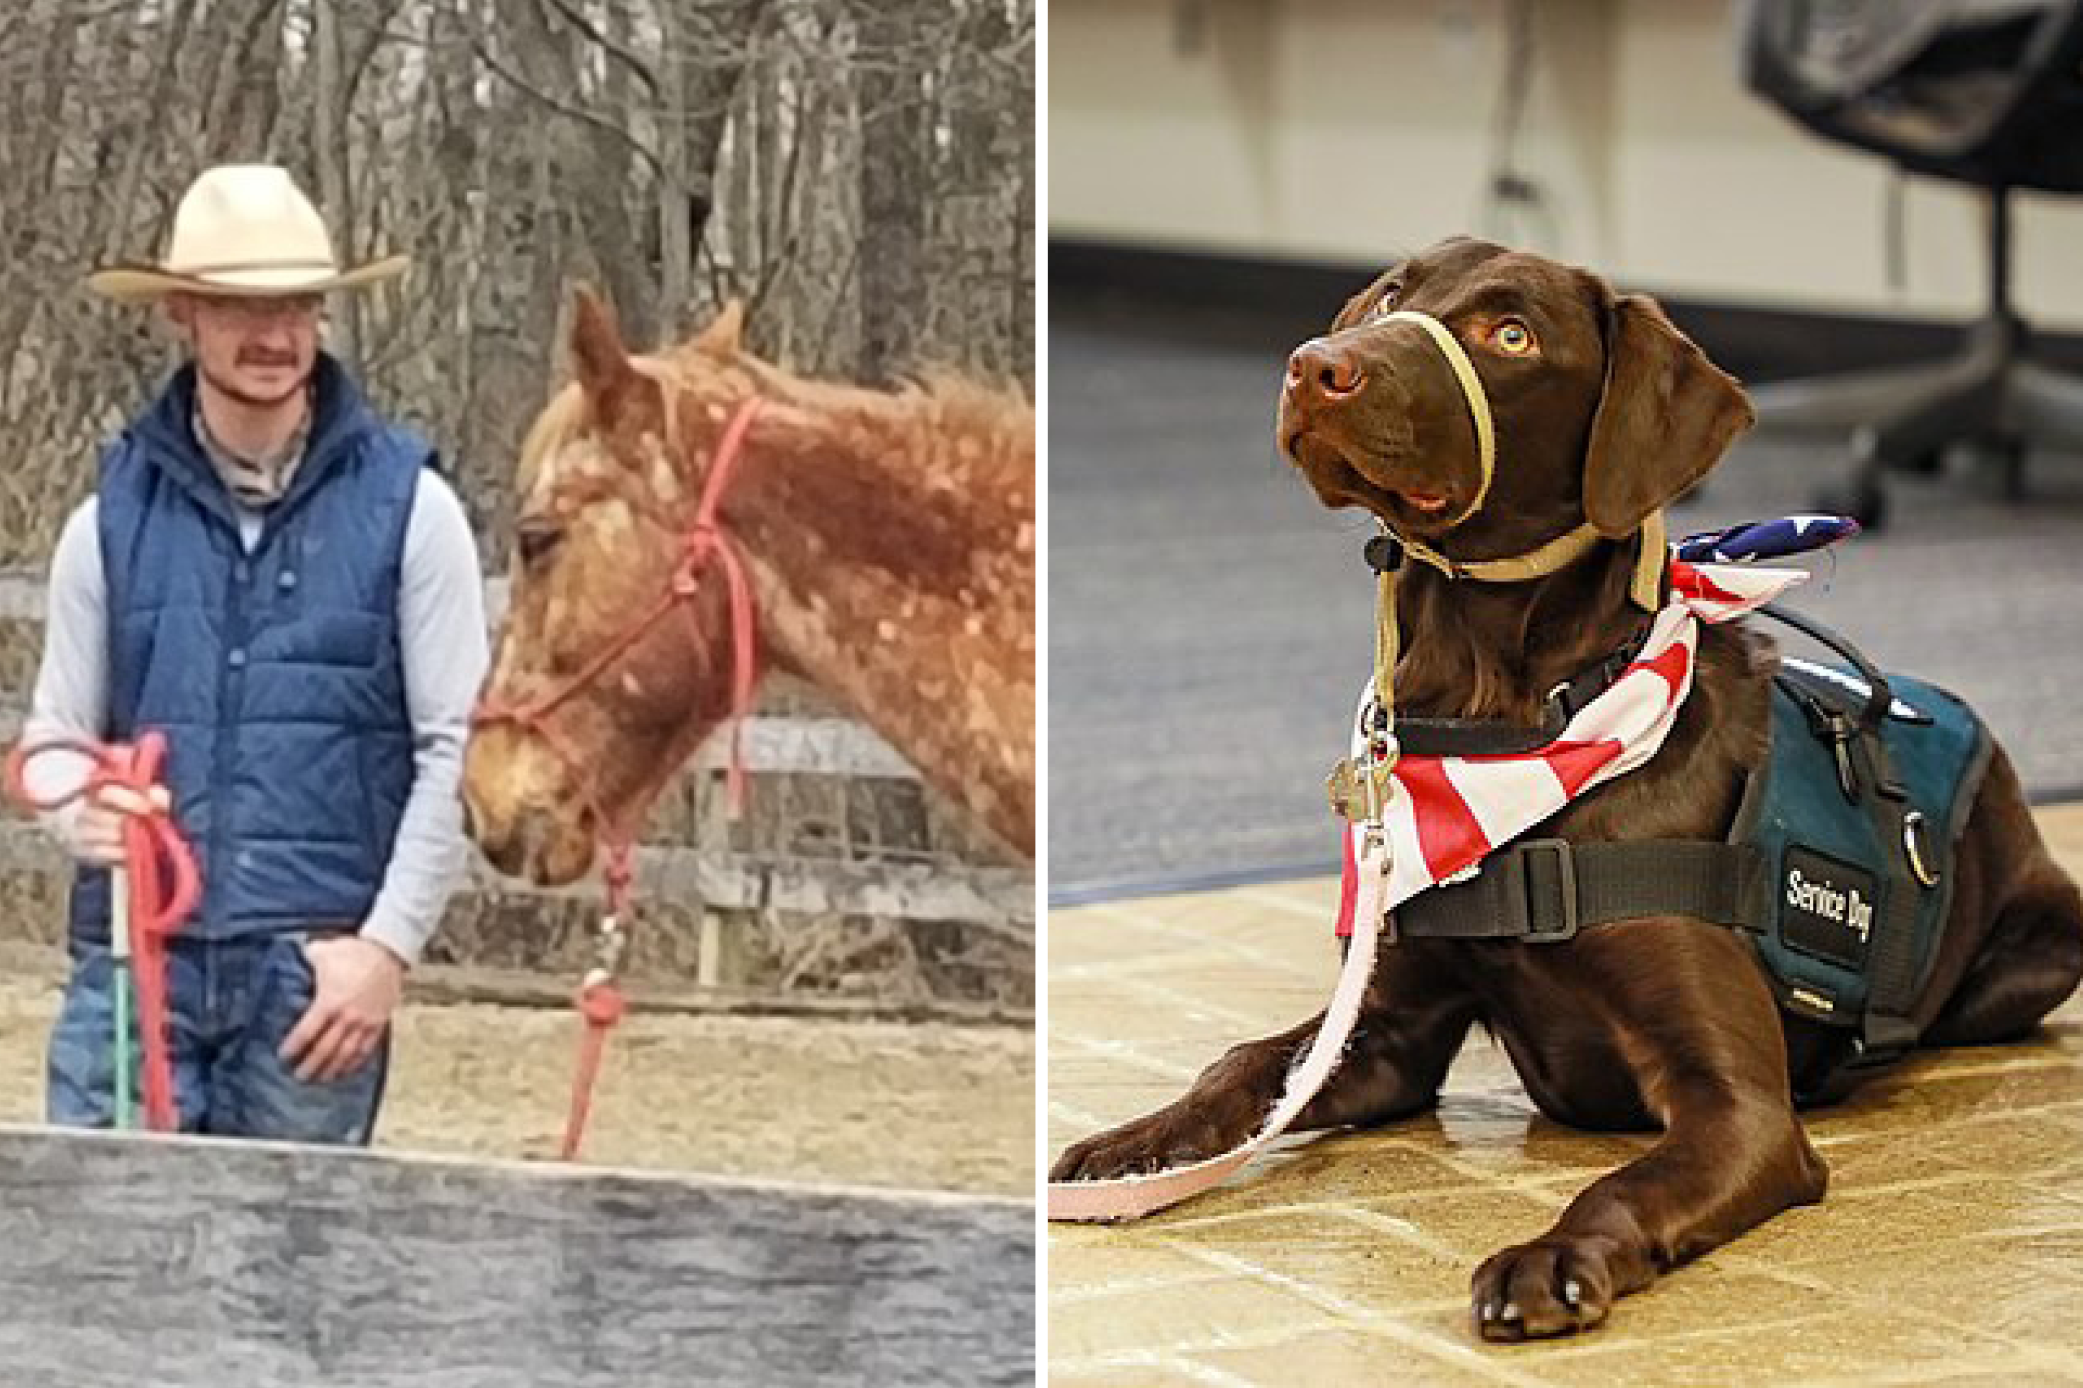 Side-by-side images of a man wearing a cowboy hat standing next to a horse and a service dog